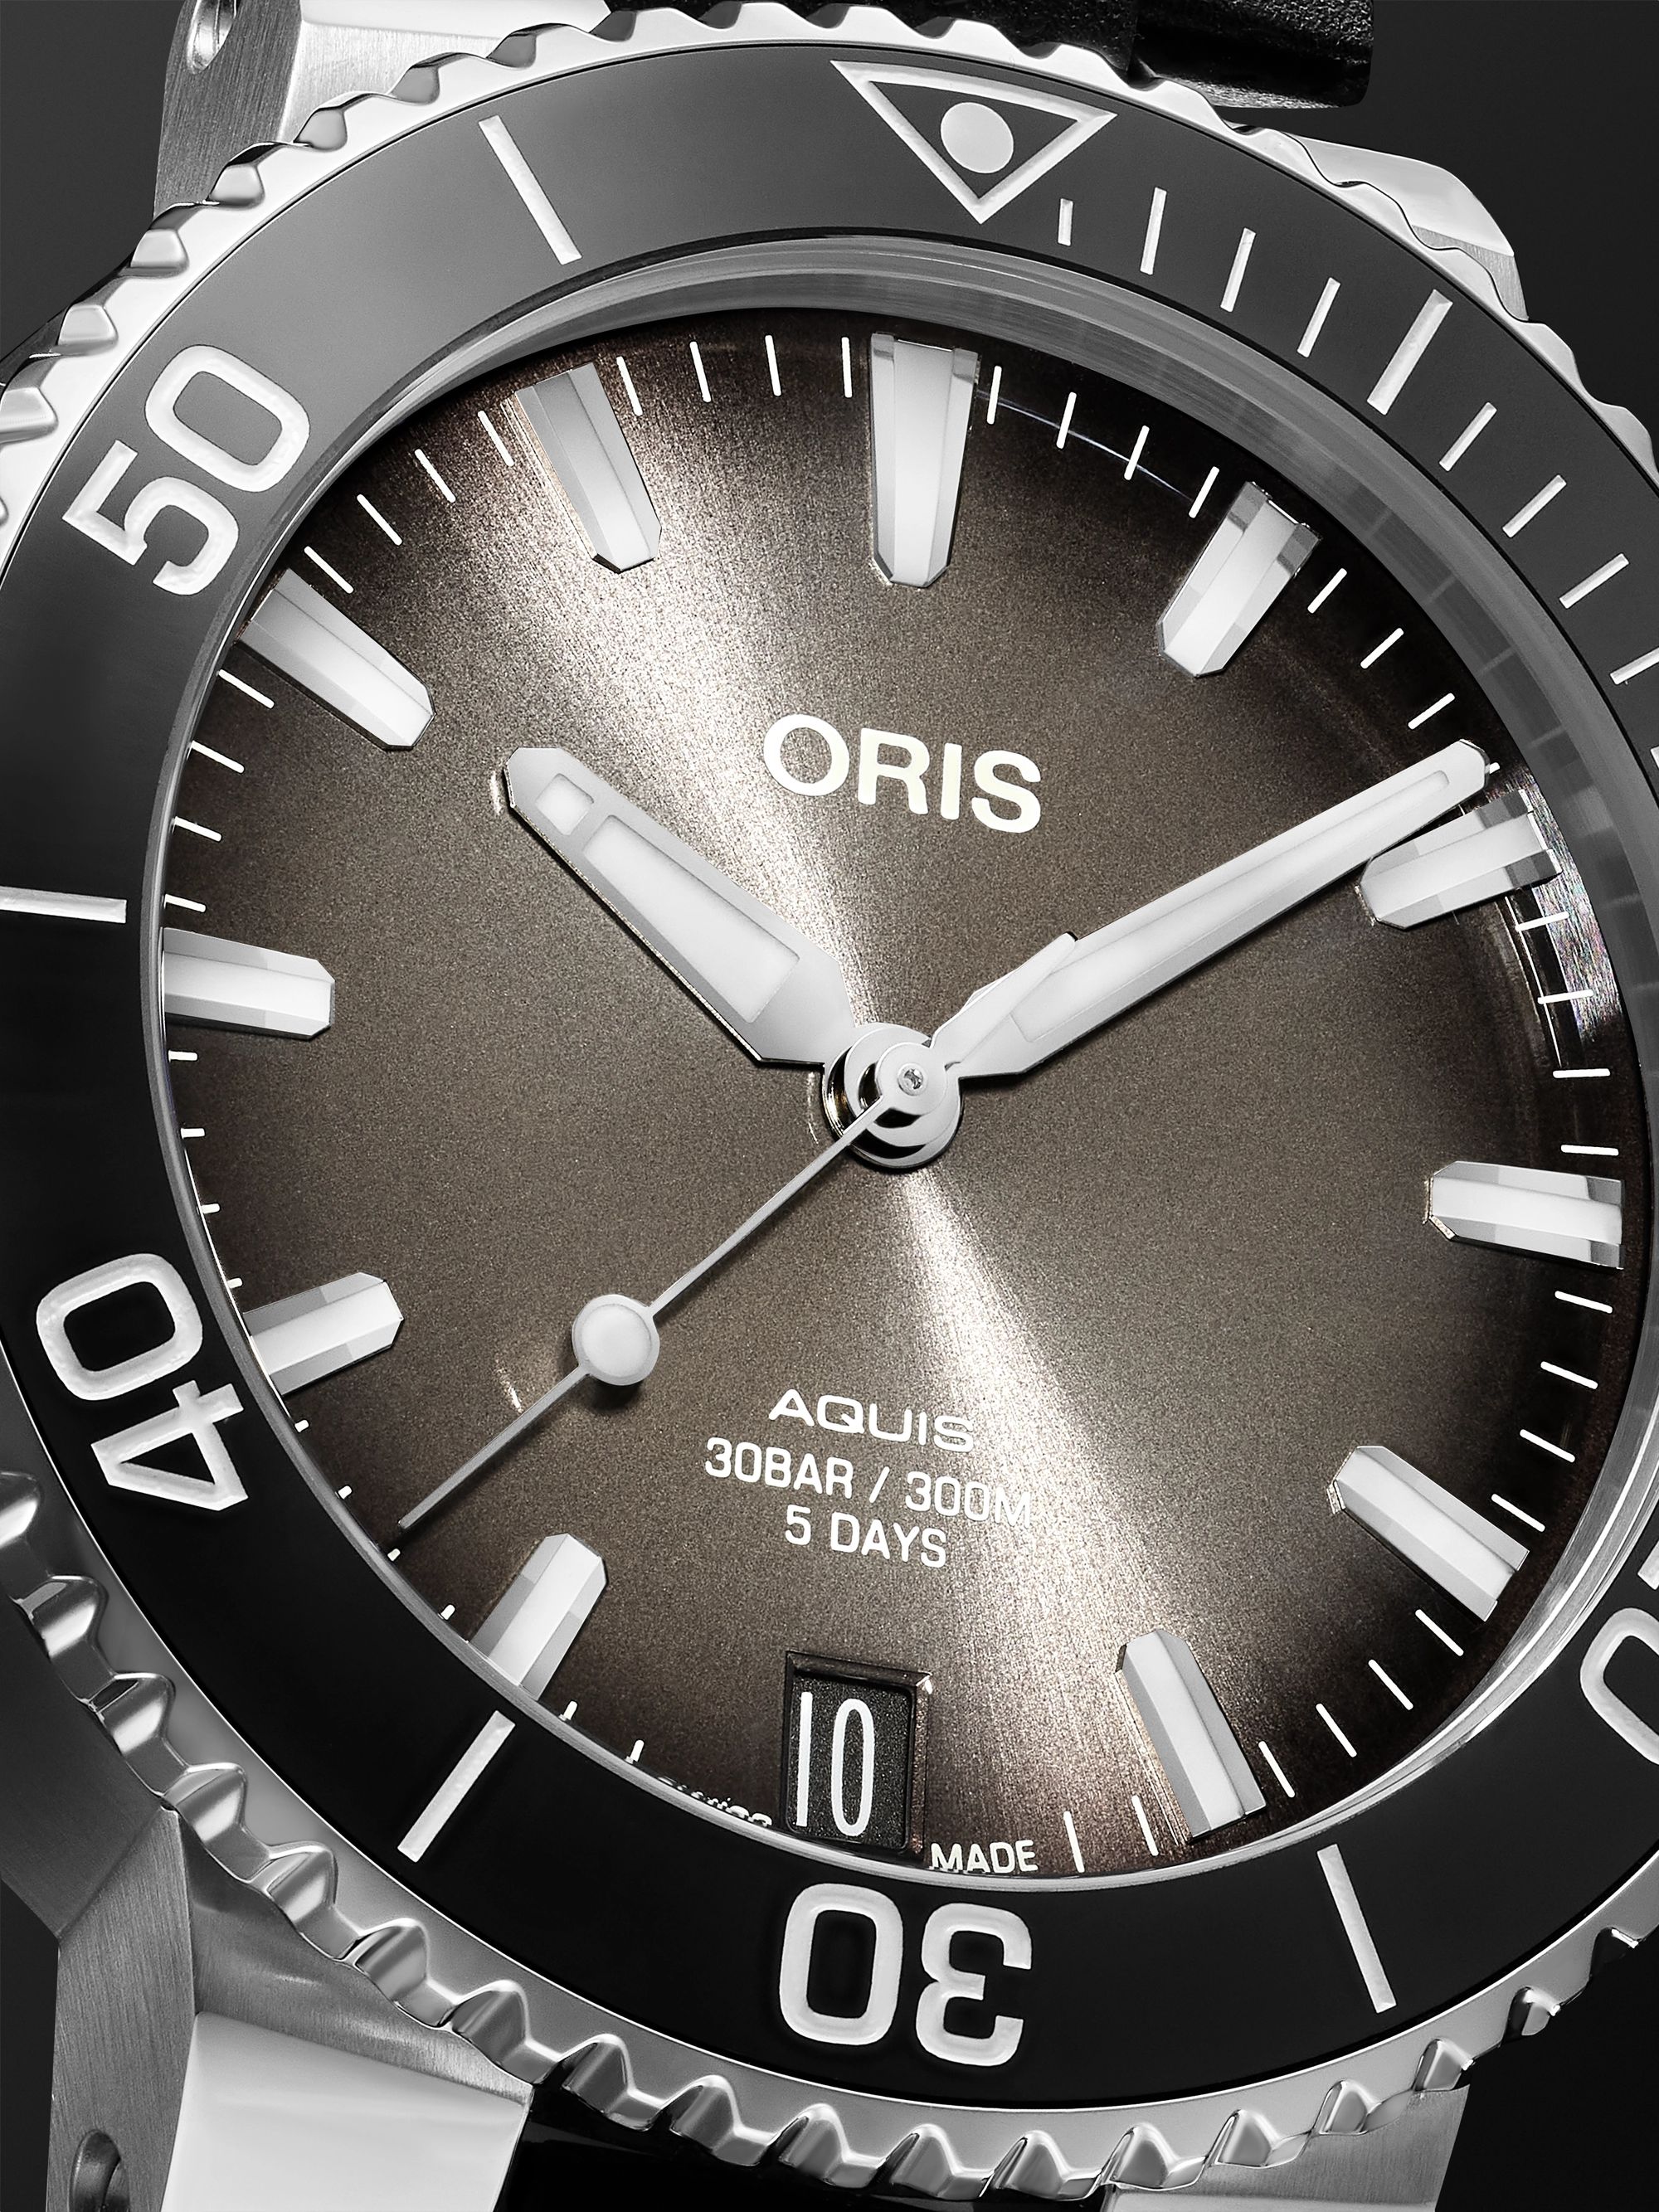 ORIS Aquis Date Automatic 41.5mm Stainless Steel and Rubber Watch, Ref. No. 01 400 7769 4154-07 4 22 74FC